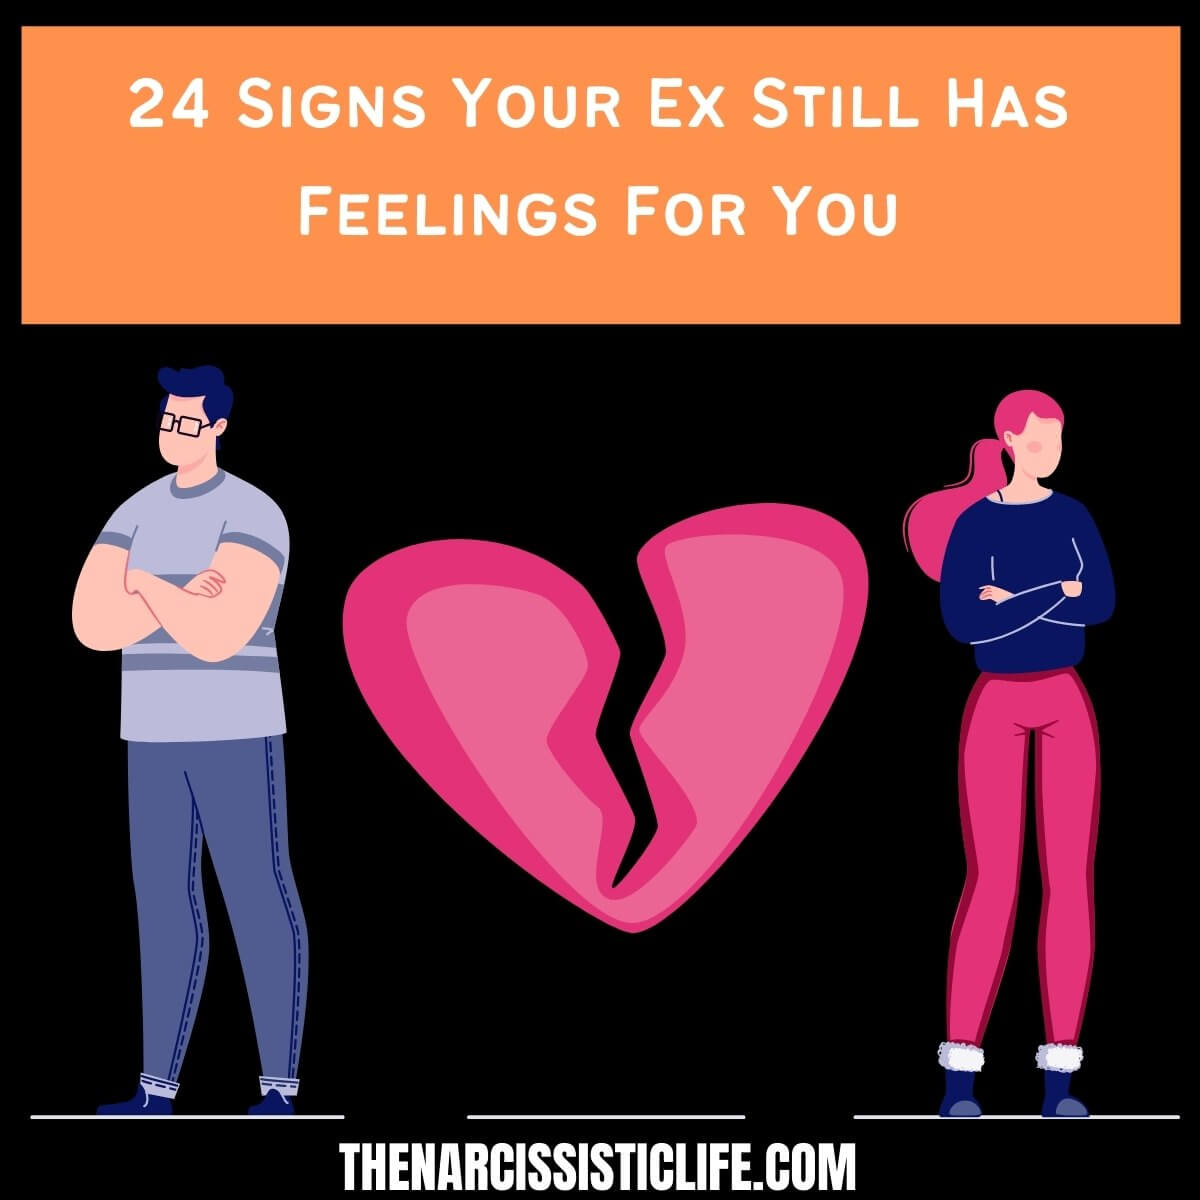 24 Signs Your Ex Still Has Feelings For You - The Narcissistic Life